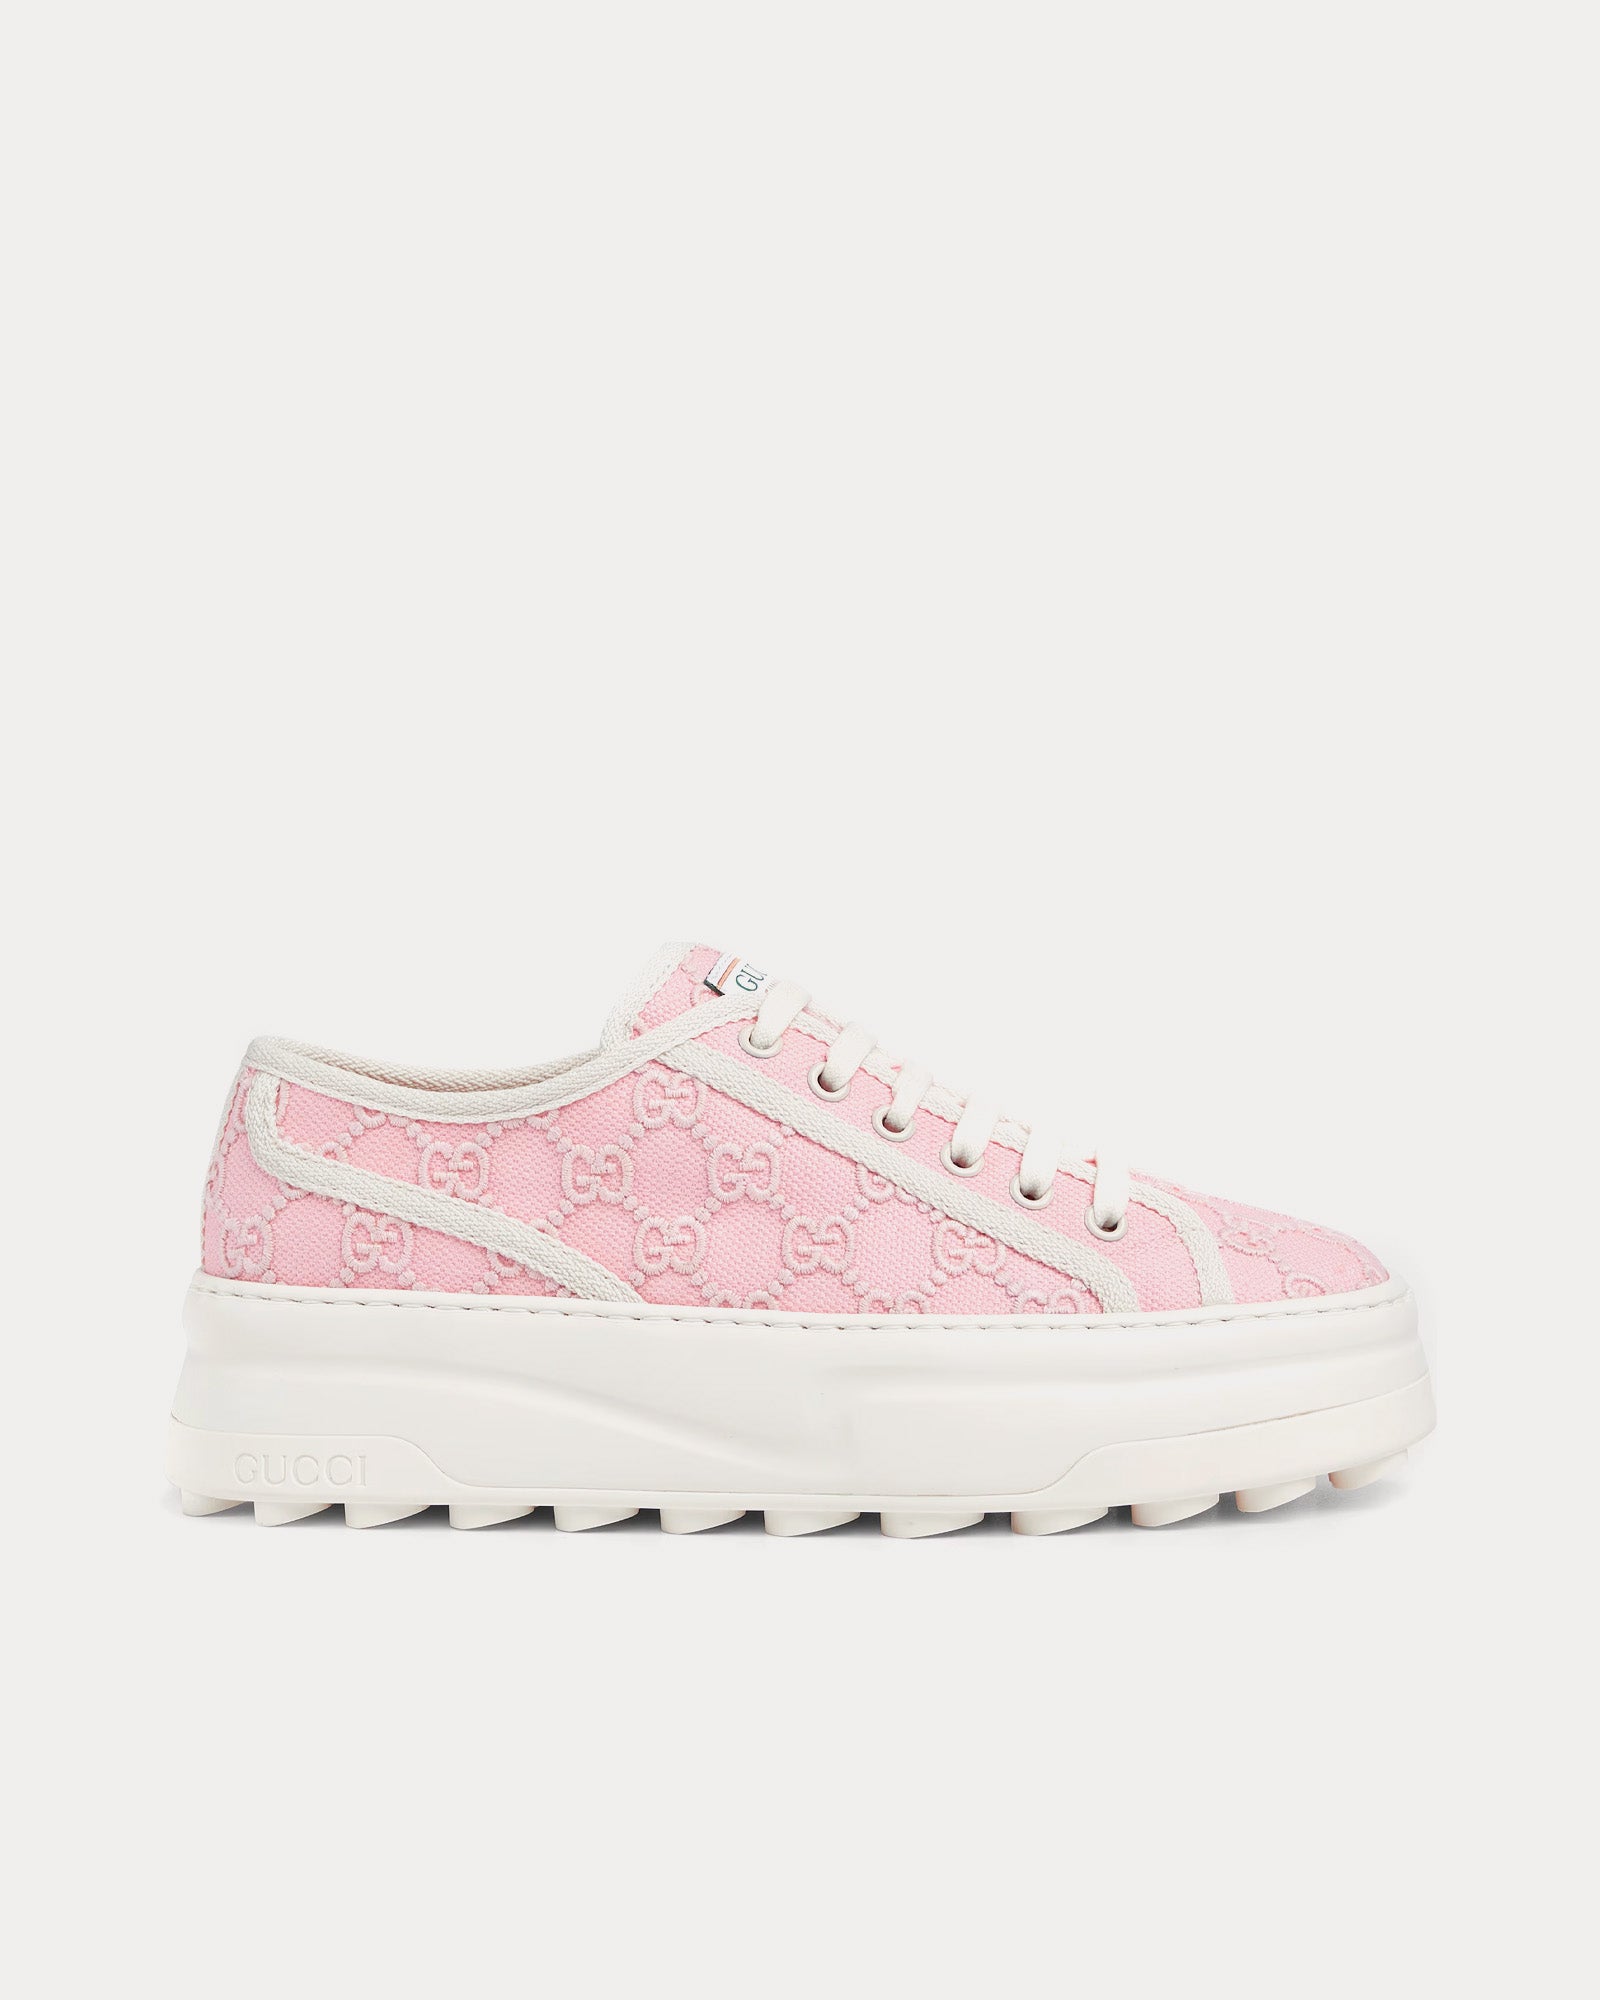 Gucci - Tennis 1977 GG Canvas Light Pink Low Top Sneakers